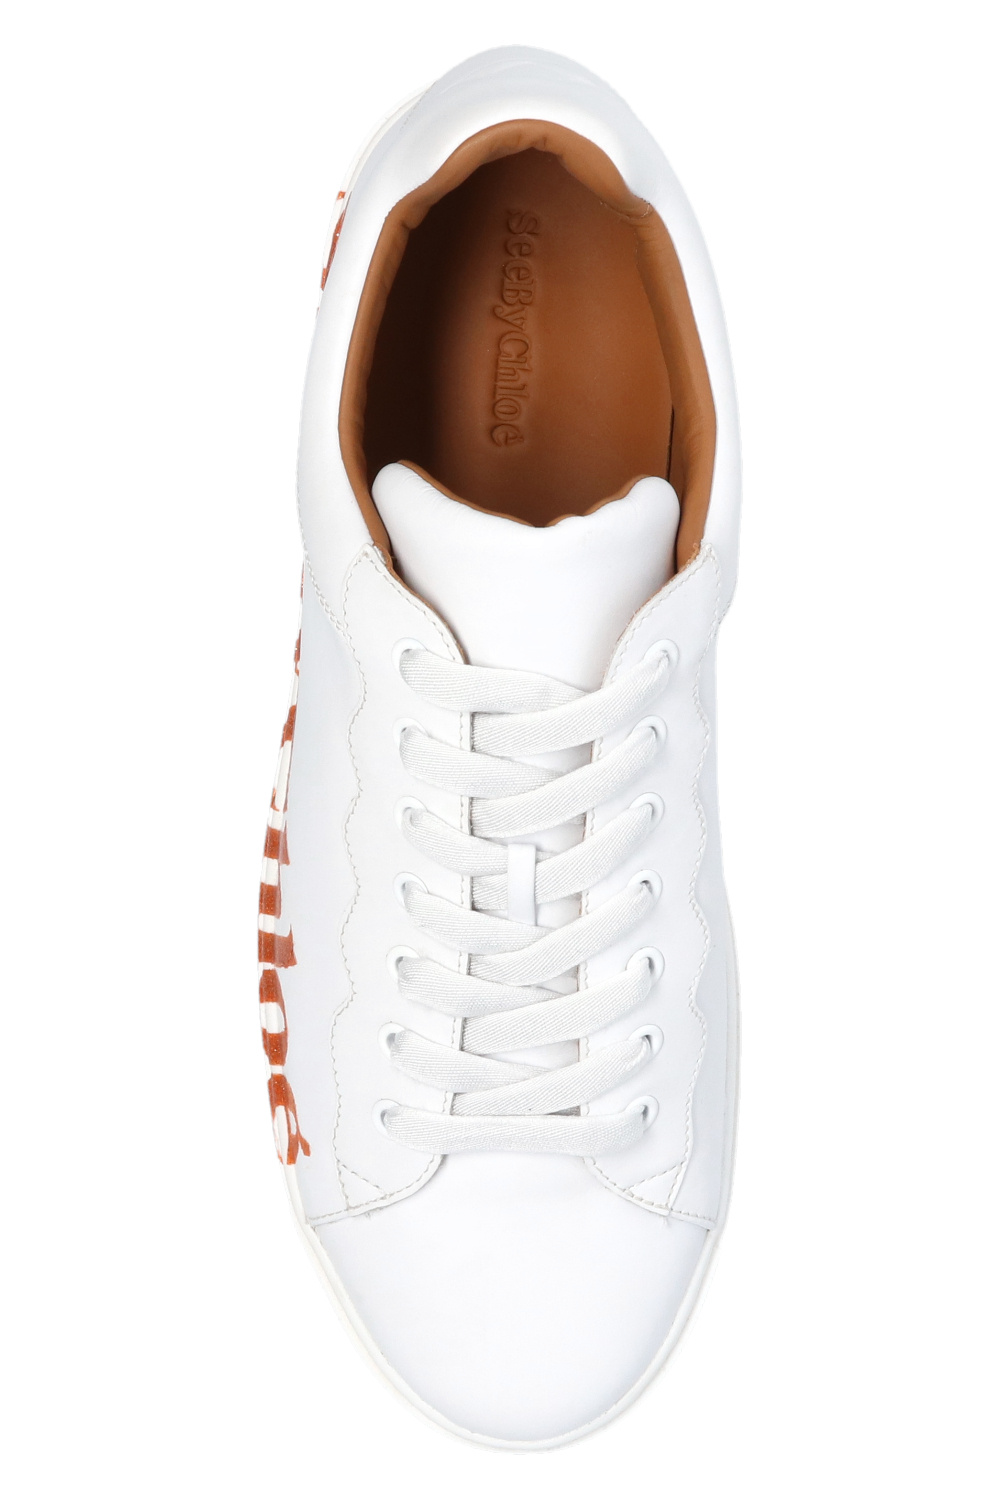 glove running - up shoes with logo See By Chloé - Lace - IetpShops Germany